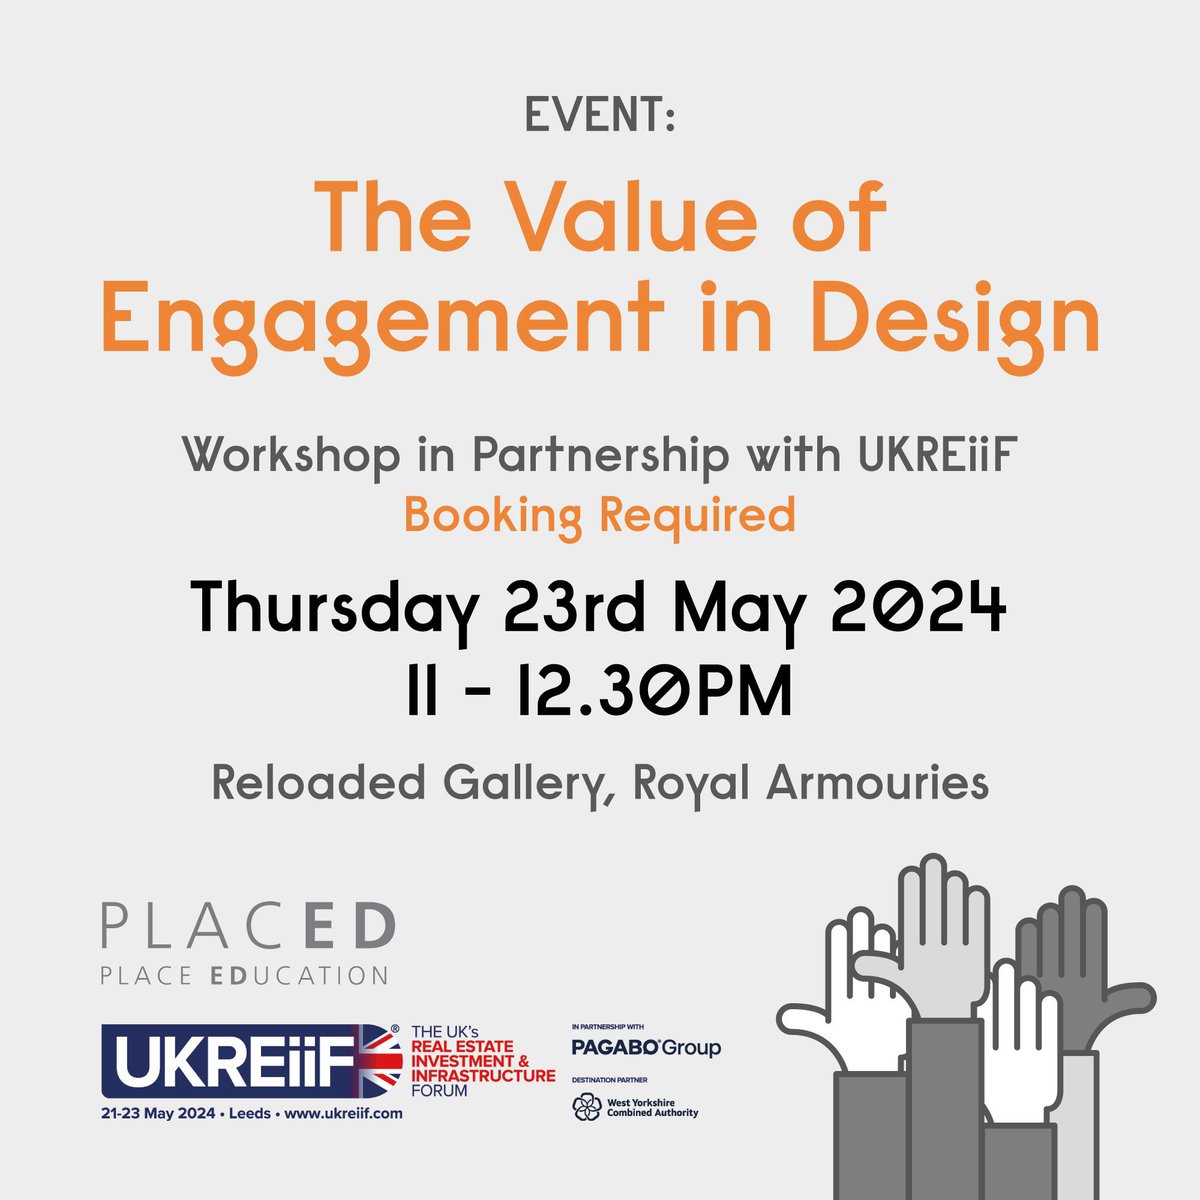 LIMITED SPACES REMAINING ⚠️ Join our workshop in partnership with @UKREiiF, at #UKREiiF2024 🙌 Drawing on our experience in practice, the session will take an interactive, participatory and collaborative approach! Please email: kim@placed.org.uk to express interest #PLACED